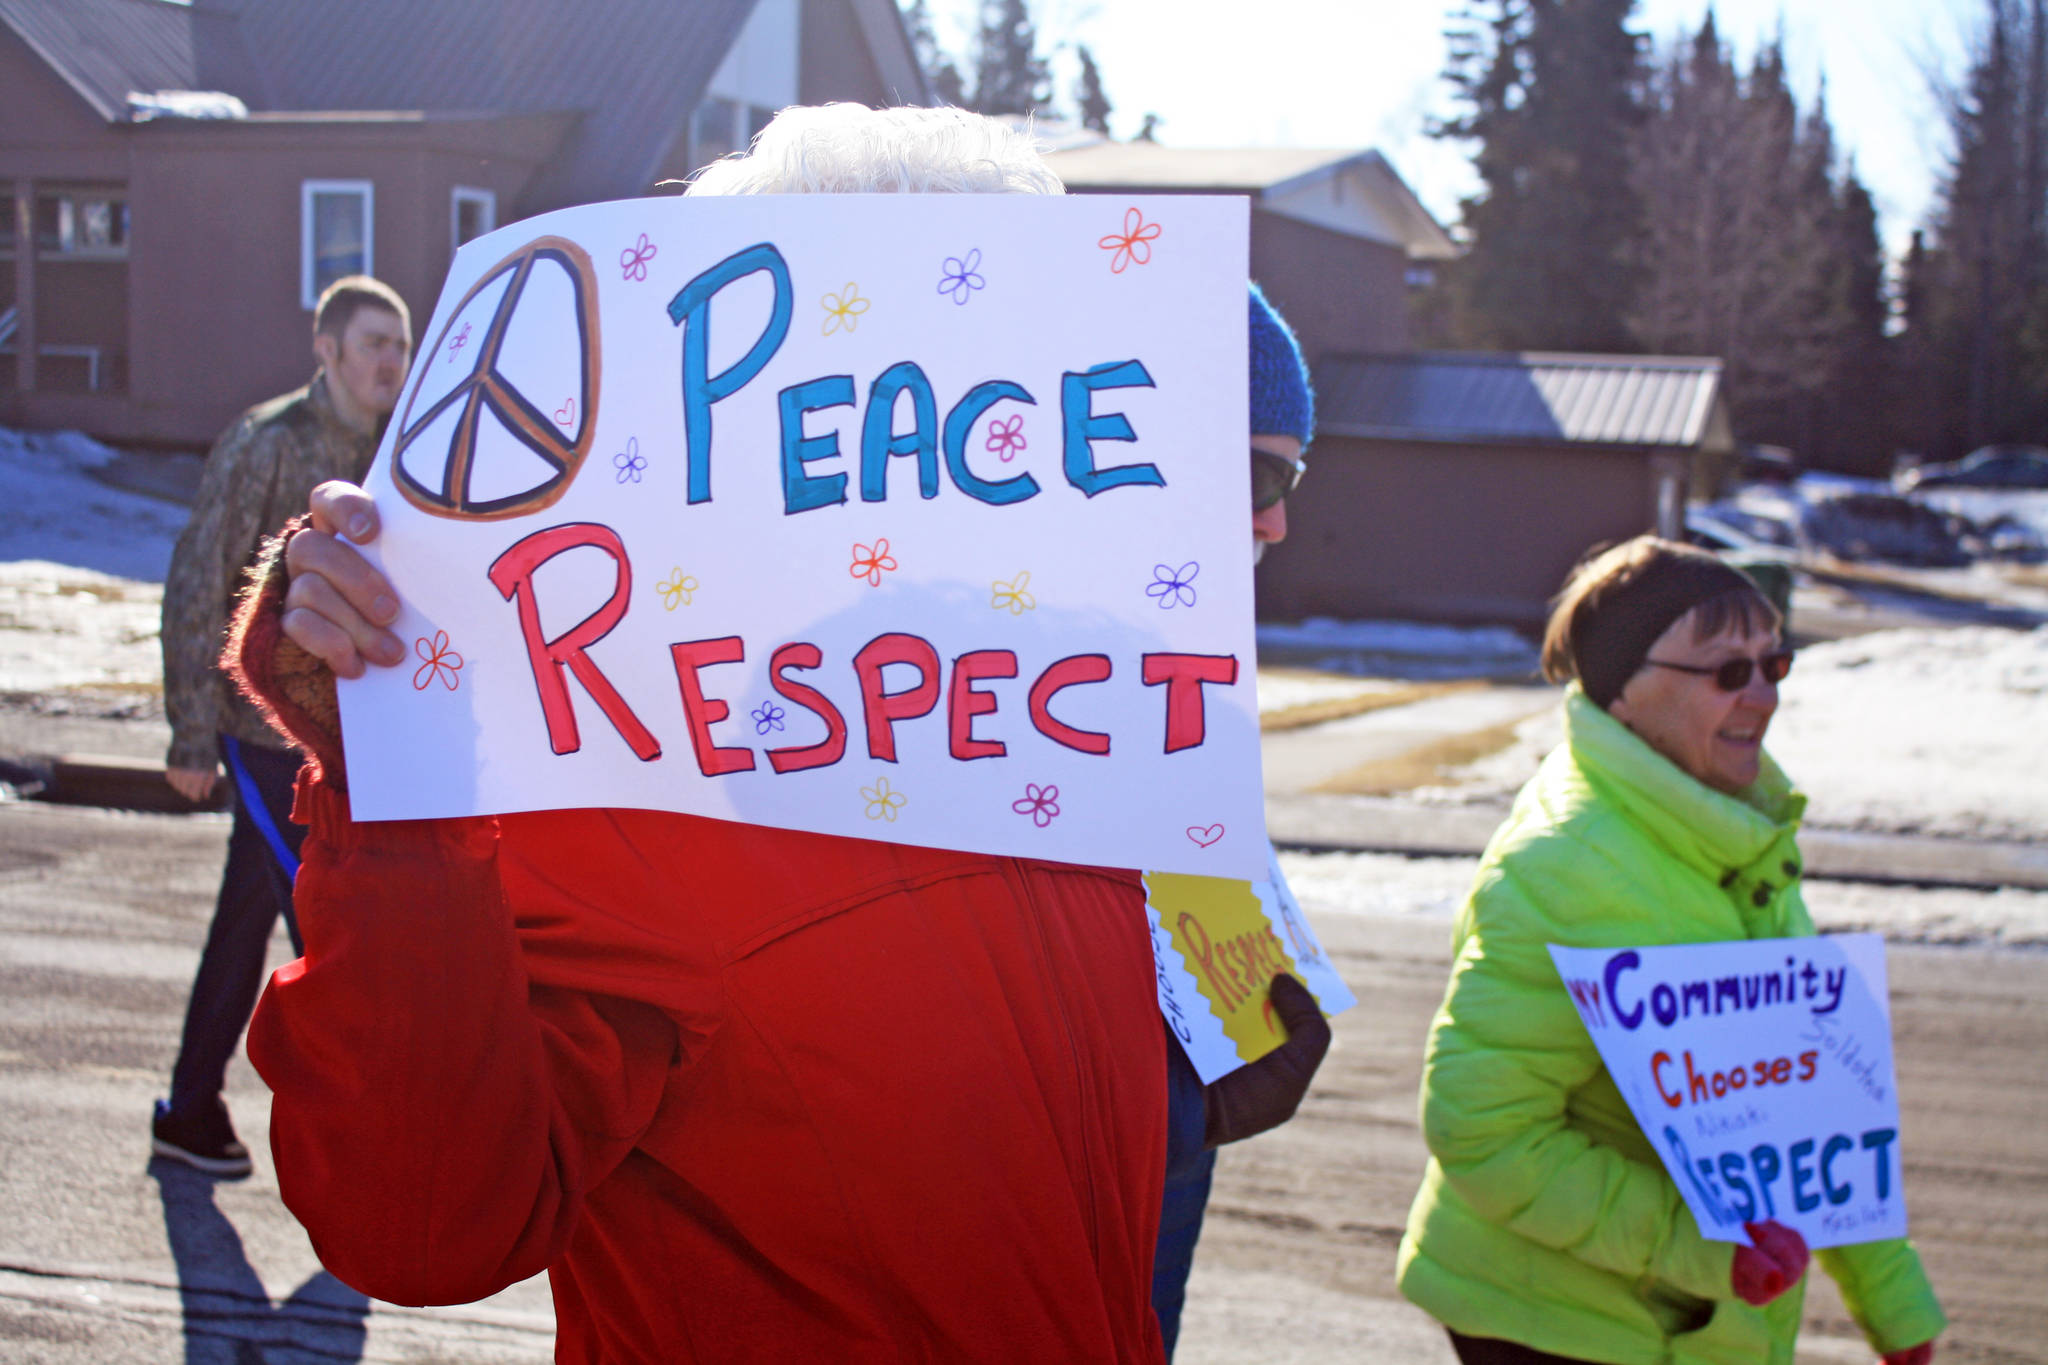 A woman holds a sign promoting respect during the Alaskans Choose Respect Awareness Event on March 28. Hosted by the LeeShore Center, the event aimed to bring awareness to the issue of domestic violence and sexual assault. (Photo by Erin Thompson/Peninsula Clarion)